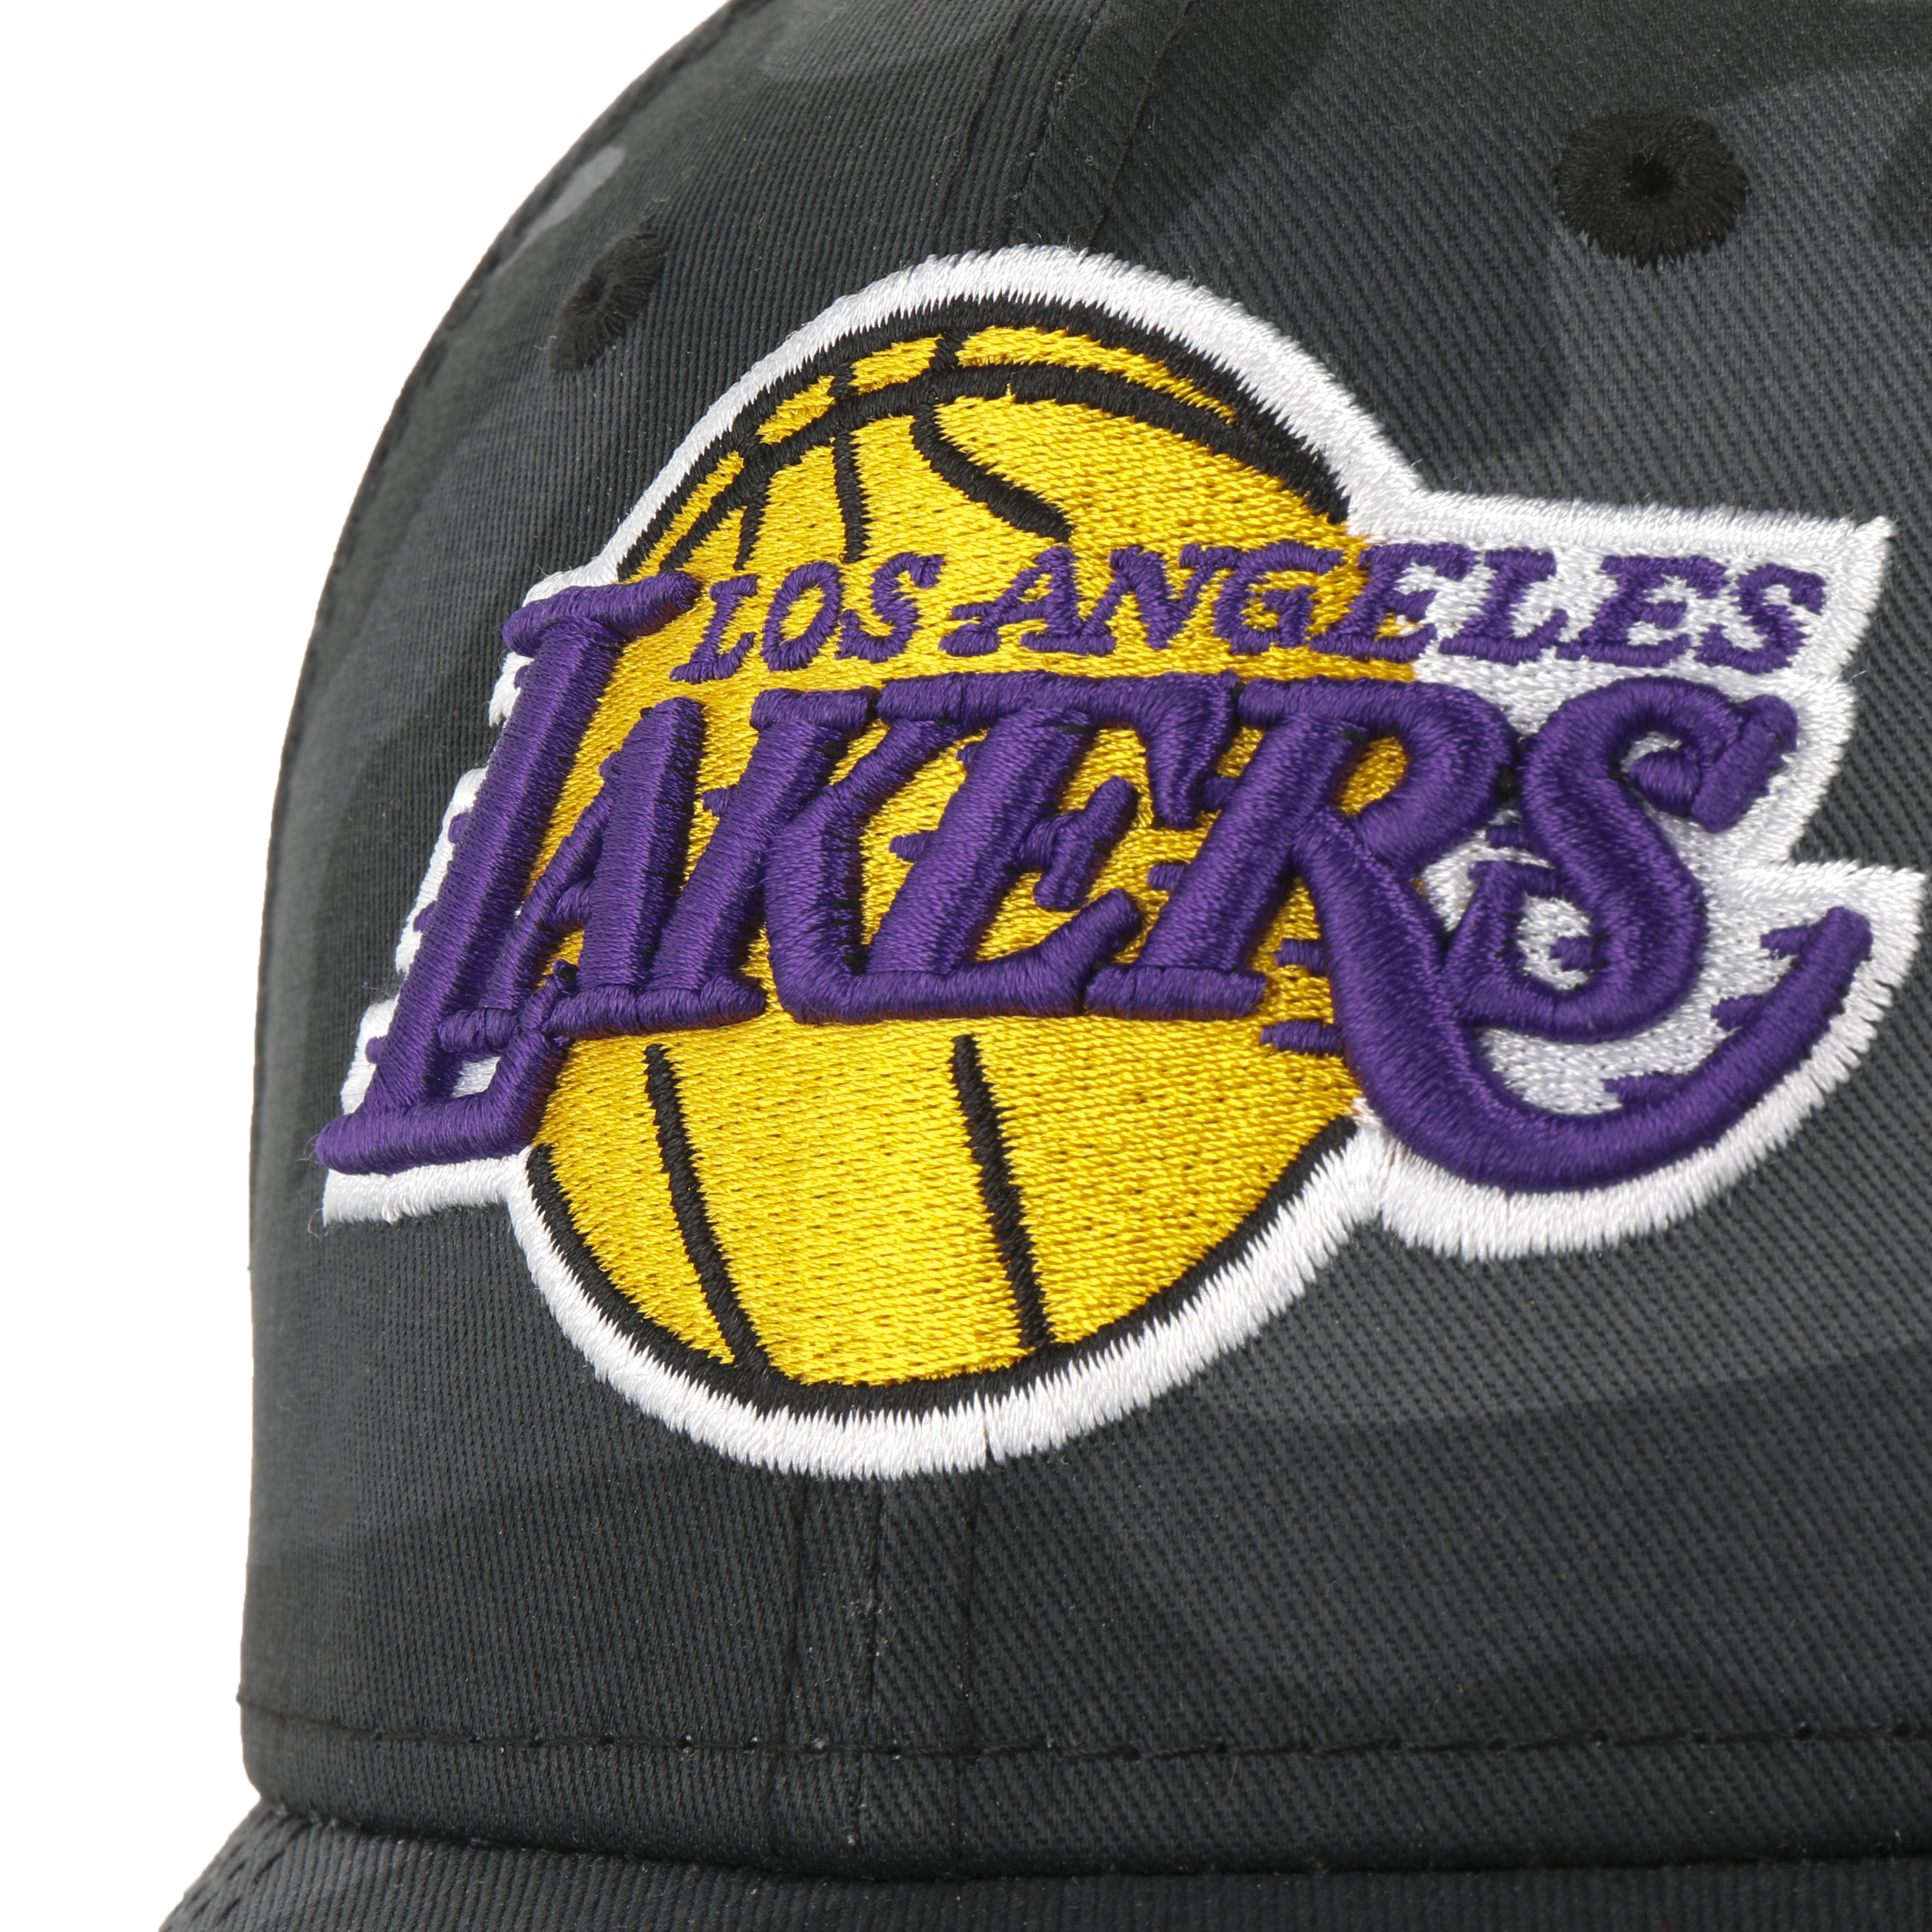 New Era NBA Essential 59Fifty Los Angeles Lakers Cap (yellow/purple)